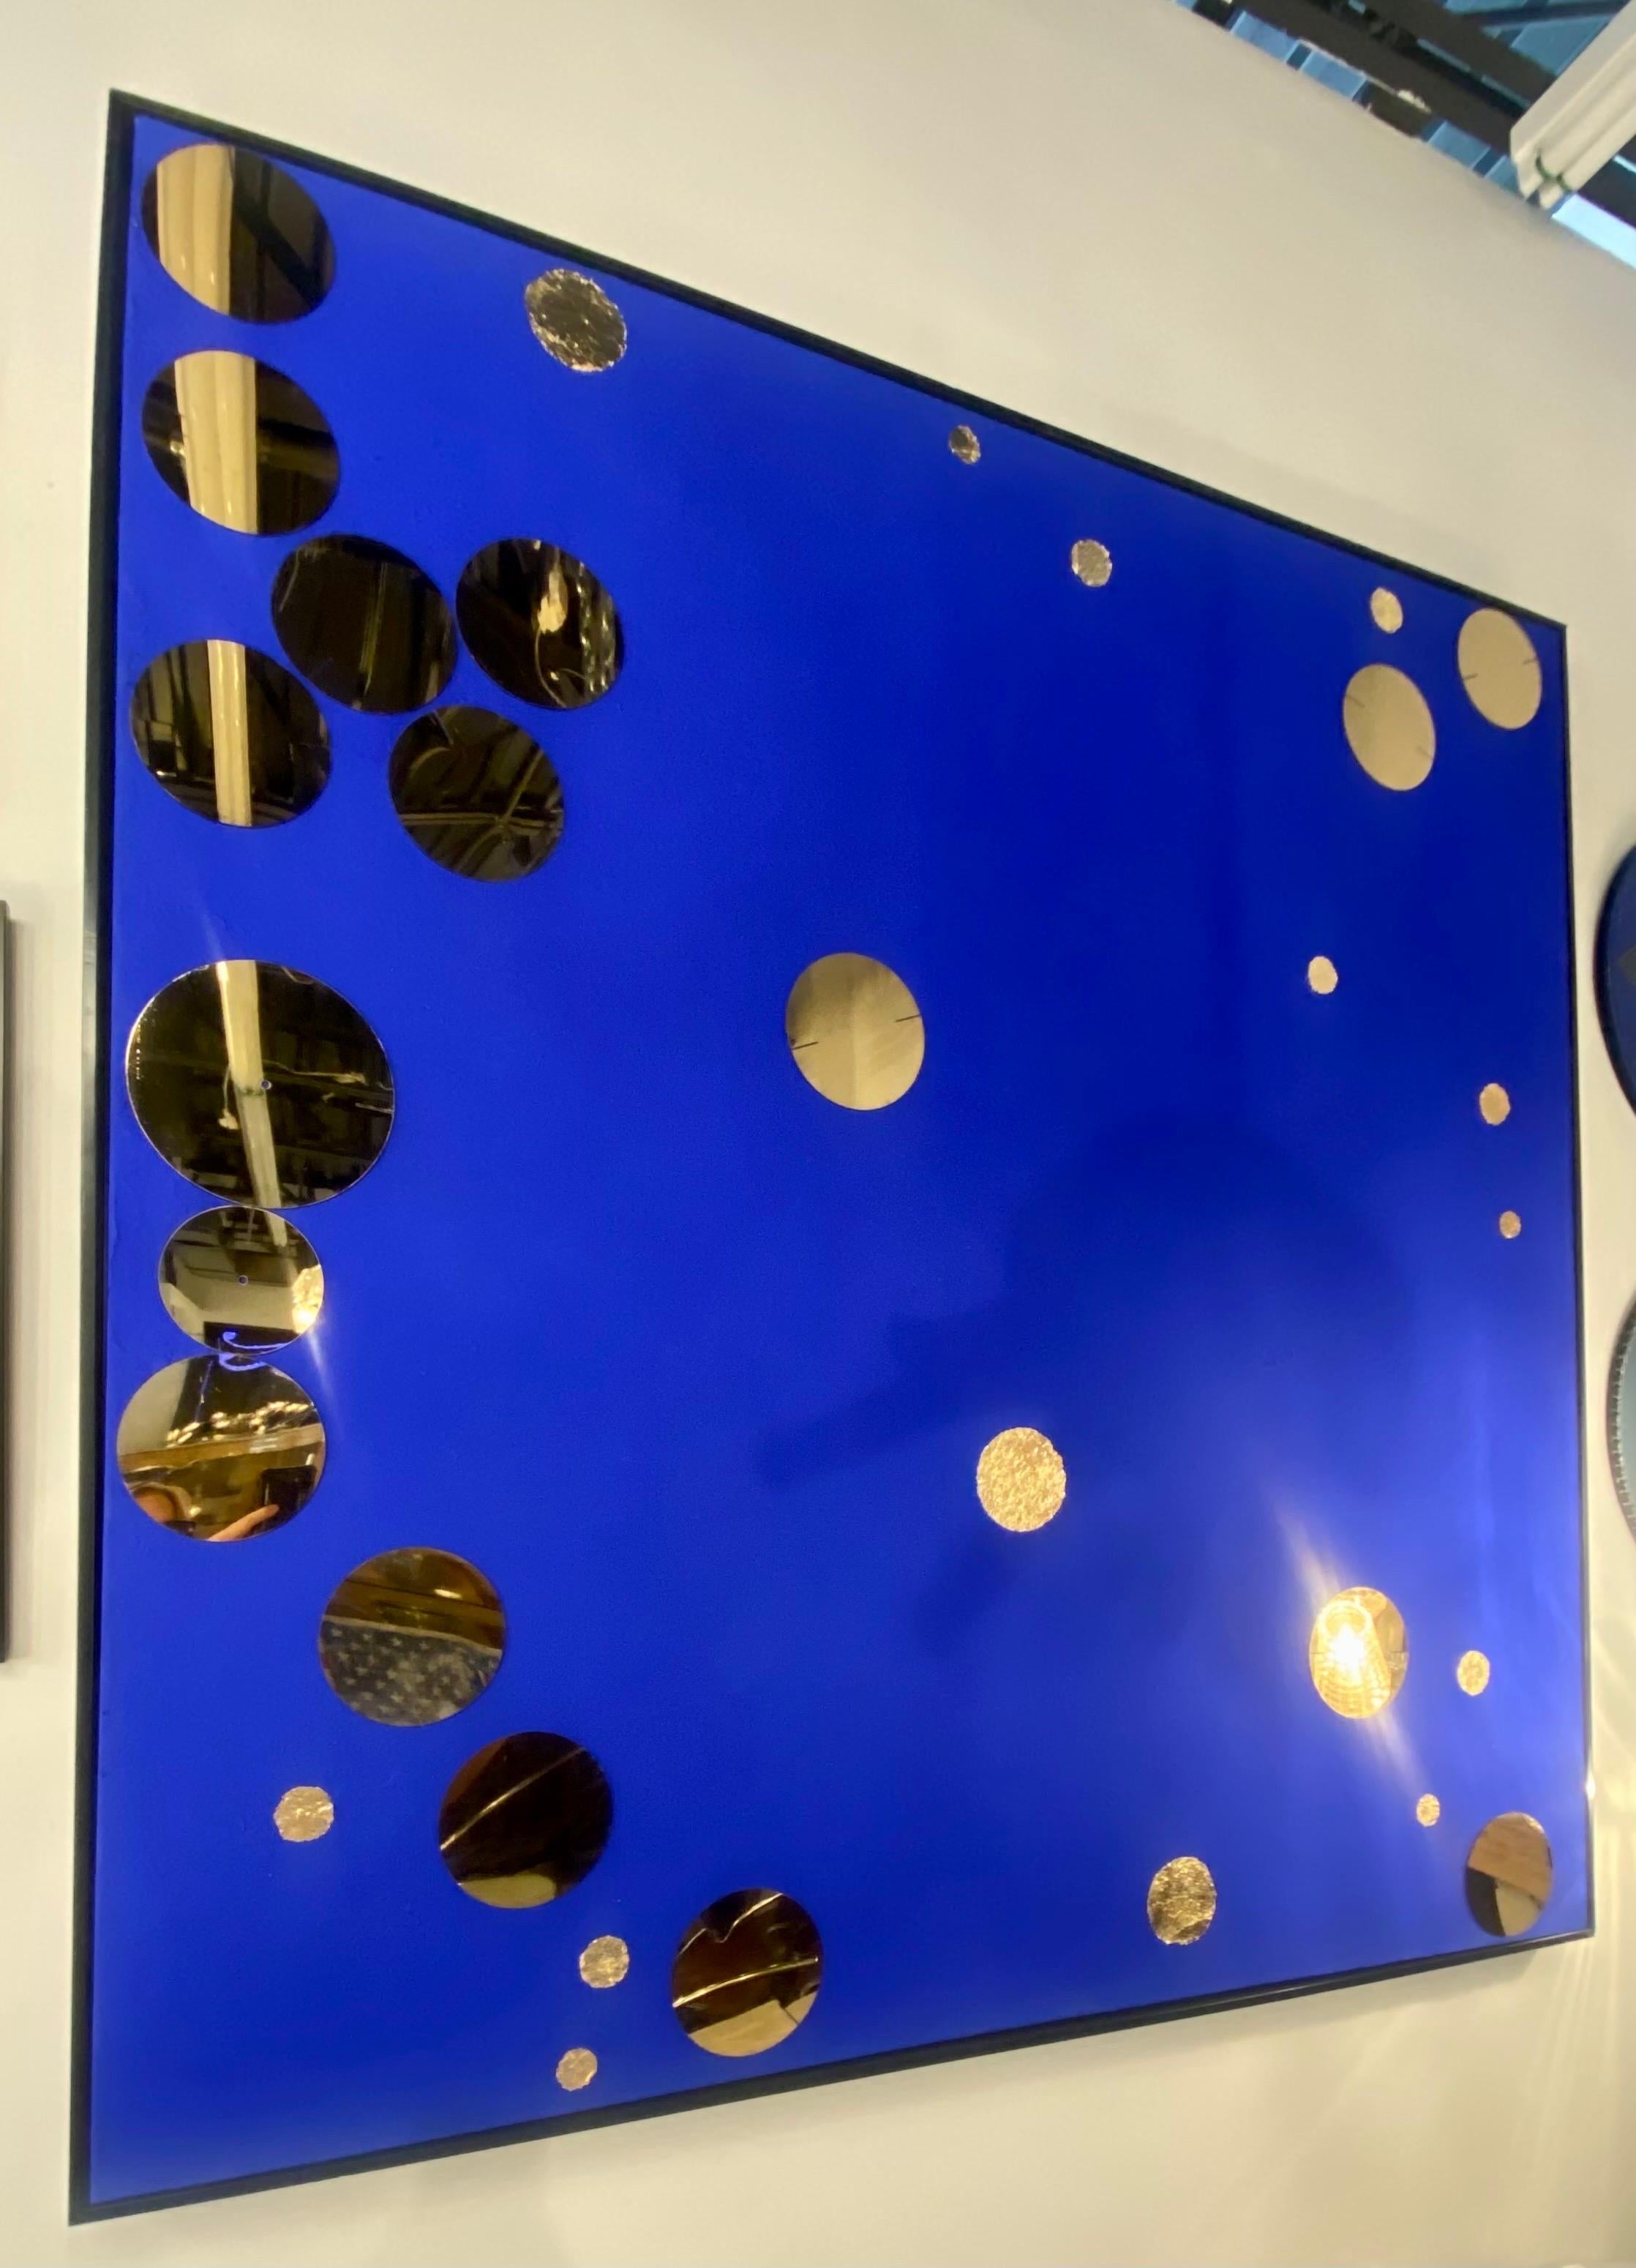 French Bubbles! A circular energy abstract painting in a Klein blue with gold leaf and gold metal bubbles. The painting is large and has an uplifting presence. 